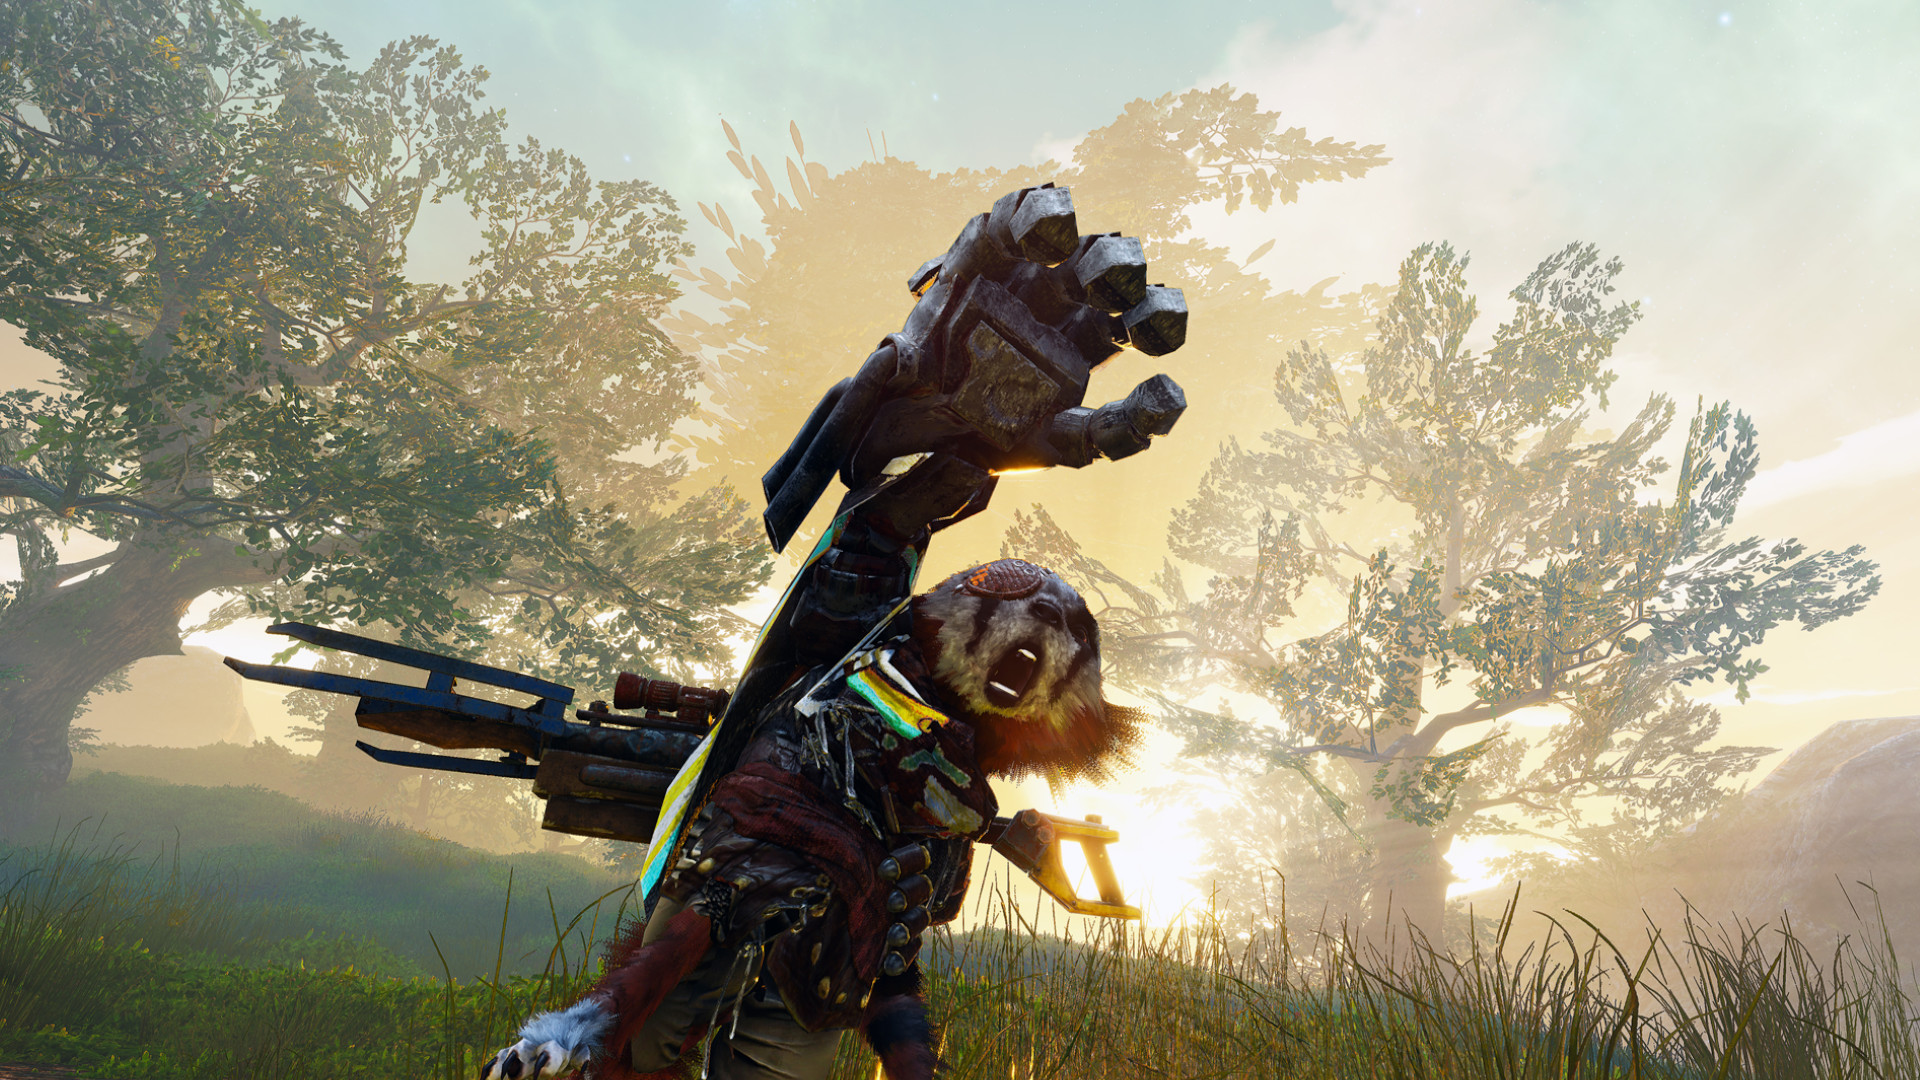 Biomutant’s latest patch adds new FOV settings, new loot, and more